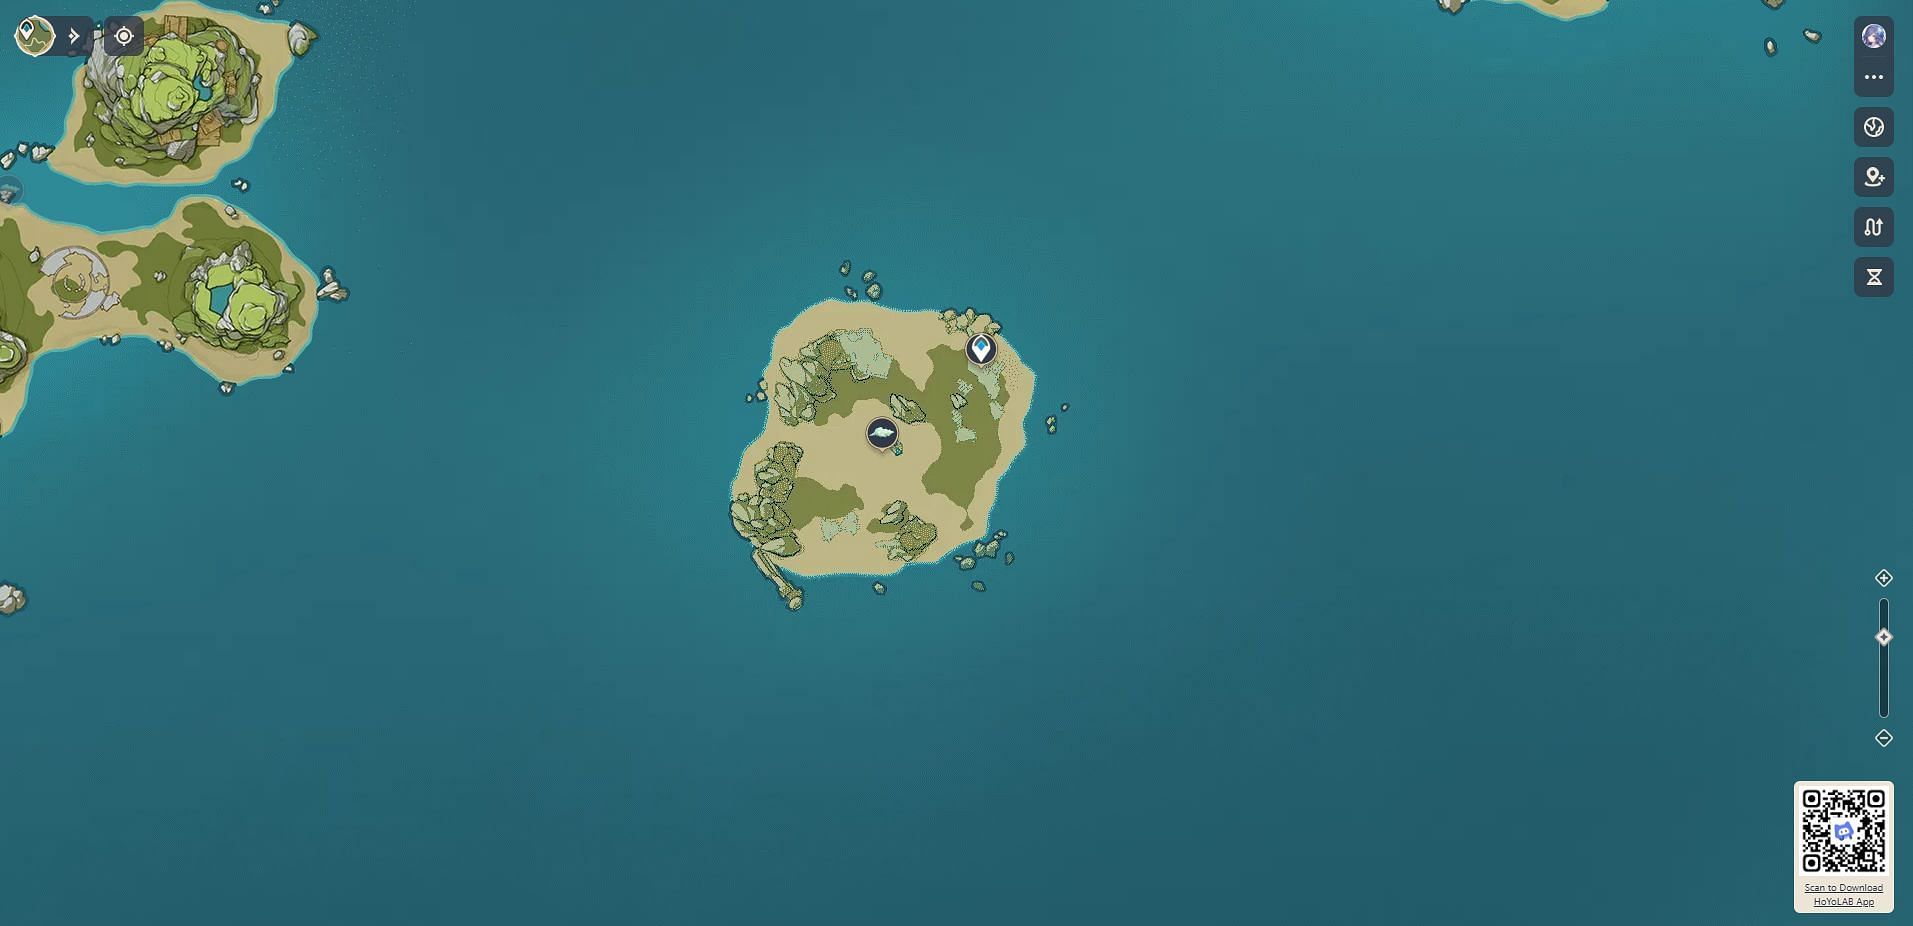 One conch in the middle of the island (Image via HoYoverse)